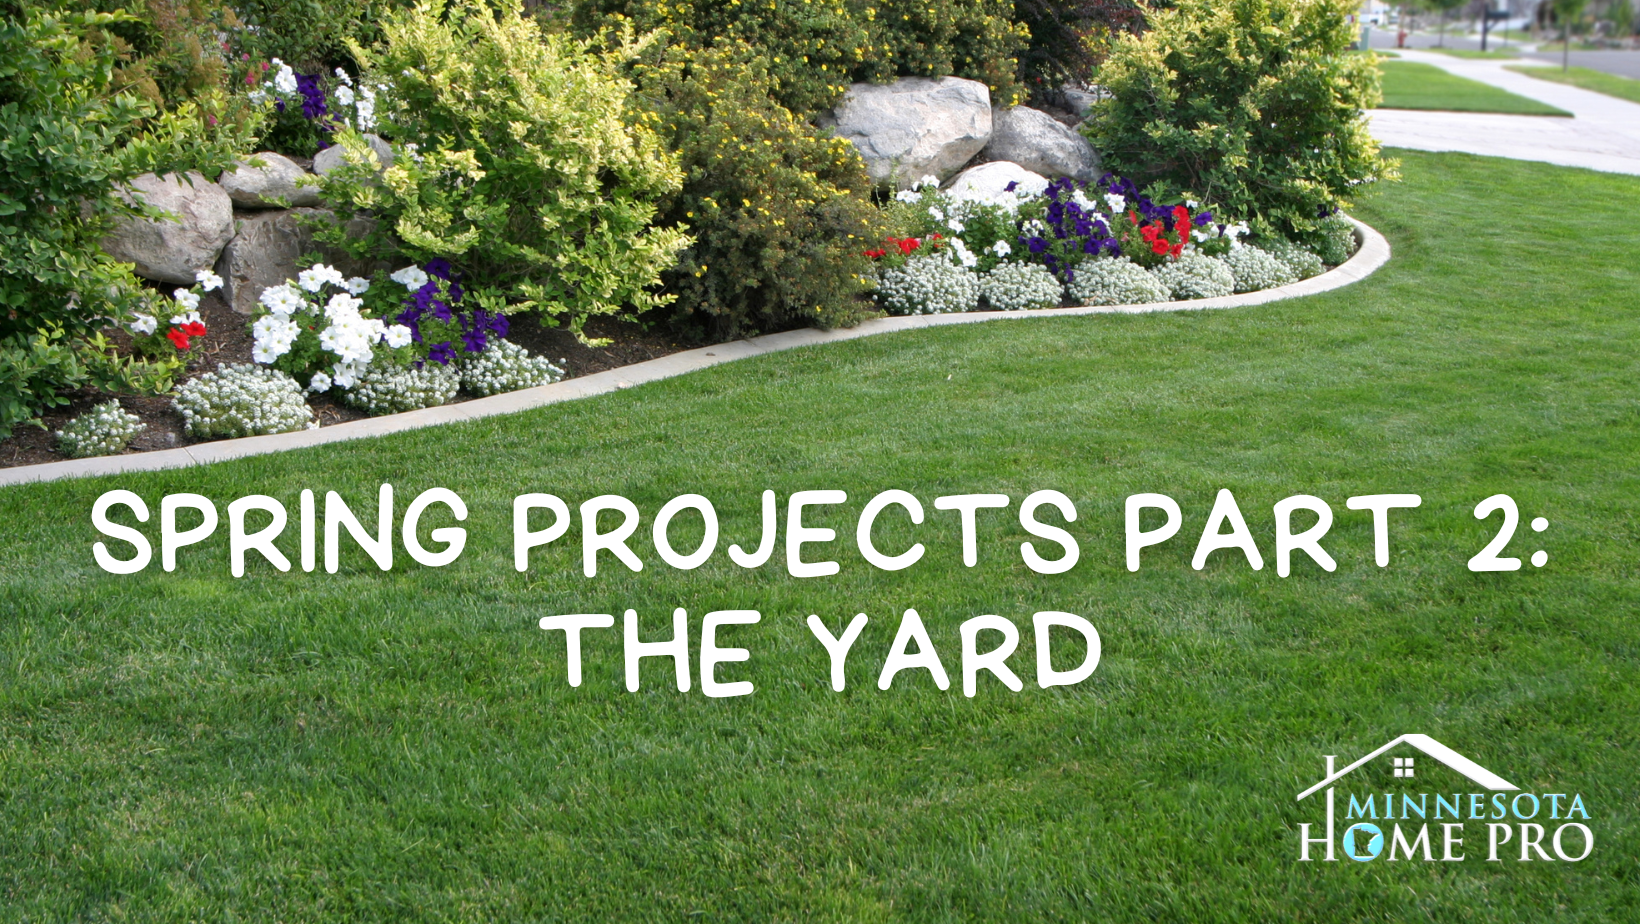 Spring Projects Part 2: The Yard